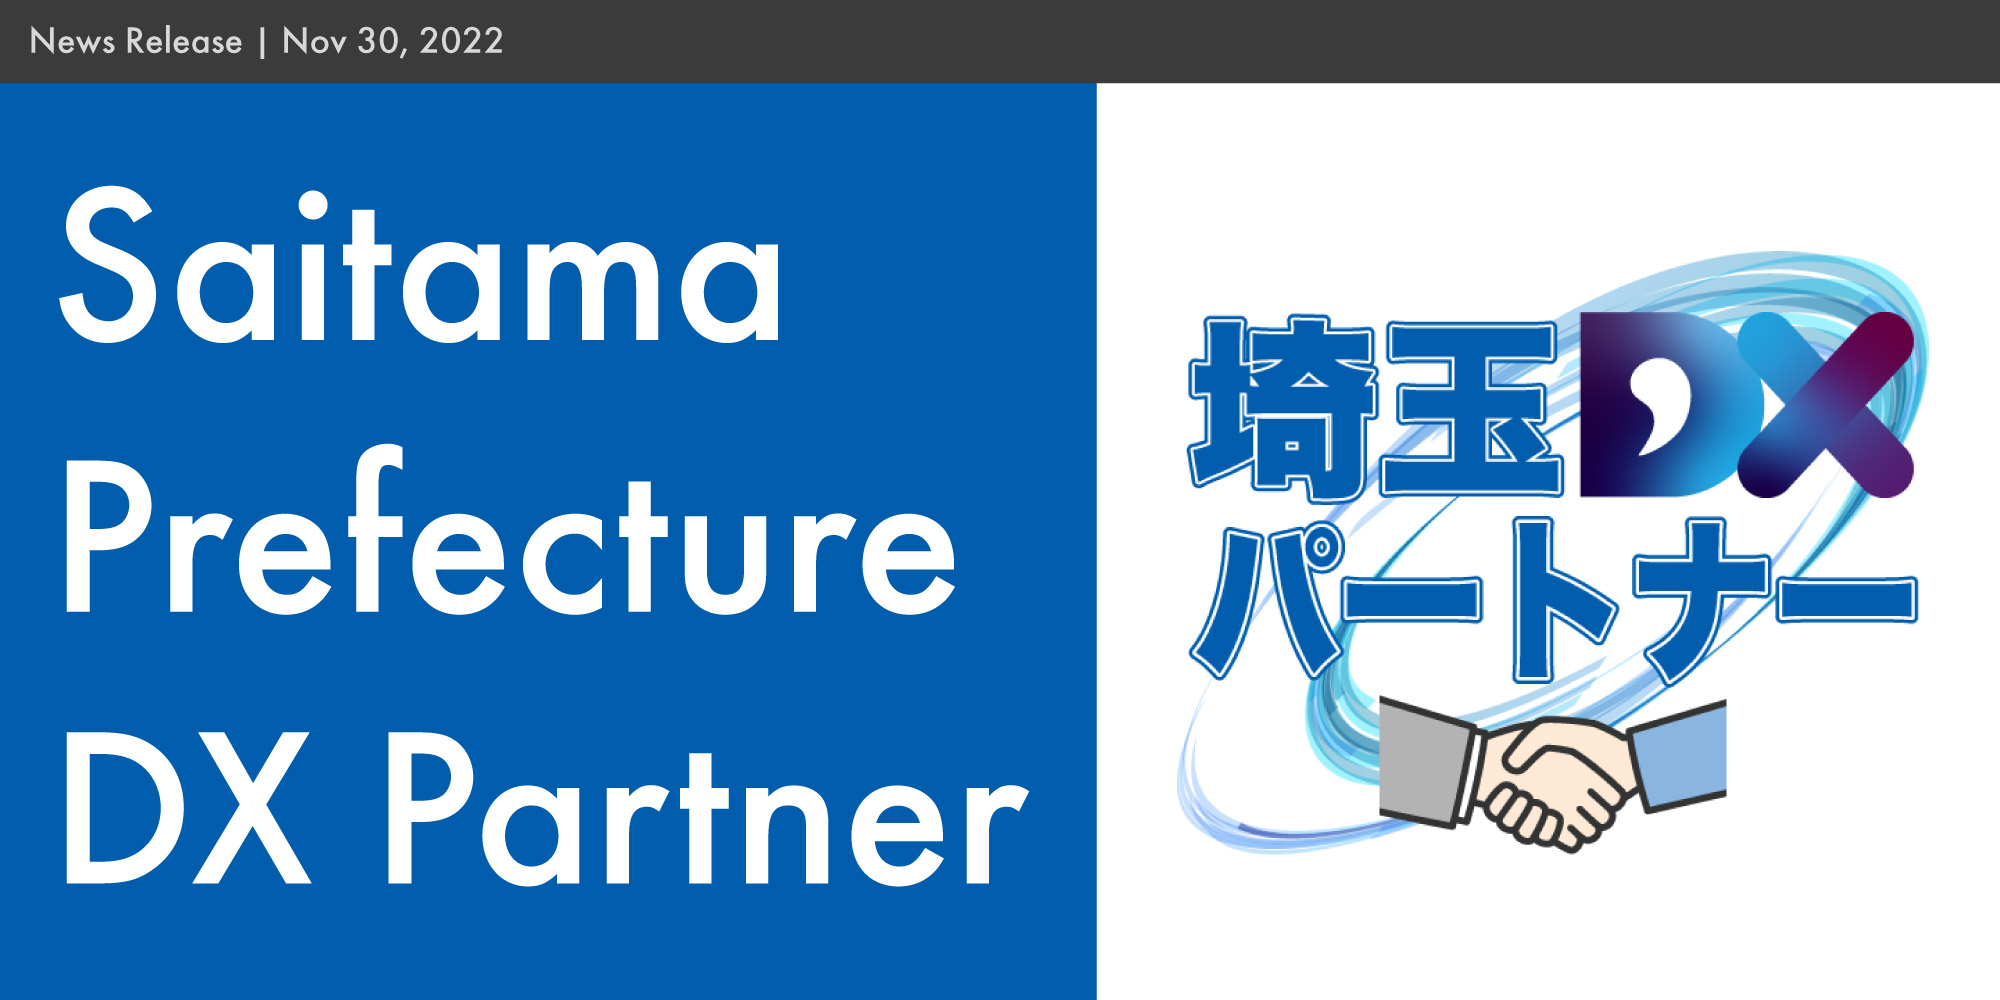 StockGraphy has been registered as a 'Saitama DX Partner' by Saitama Prefecture.